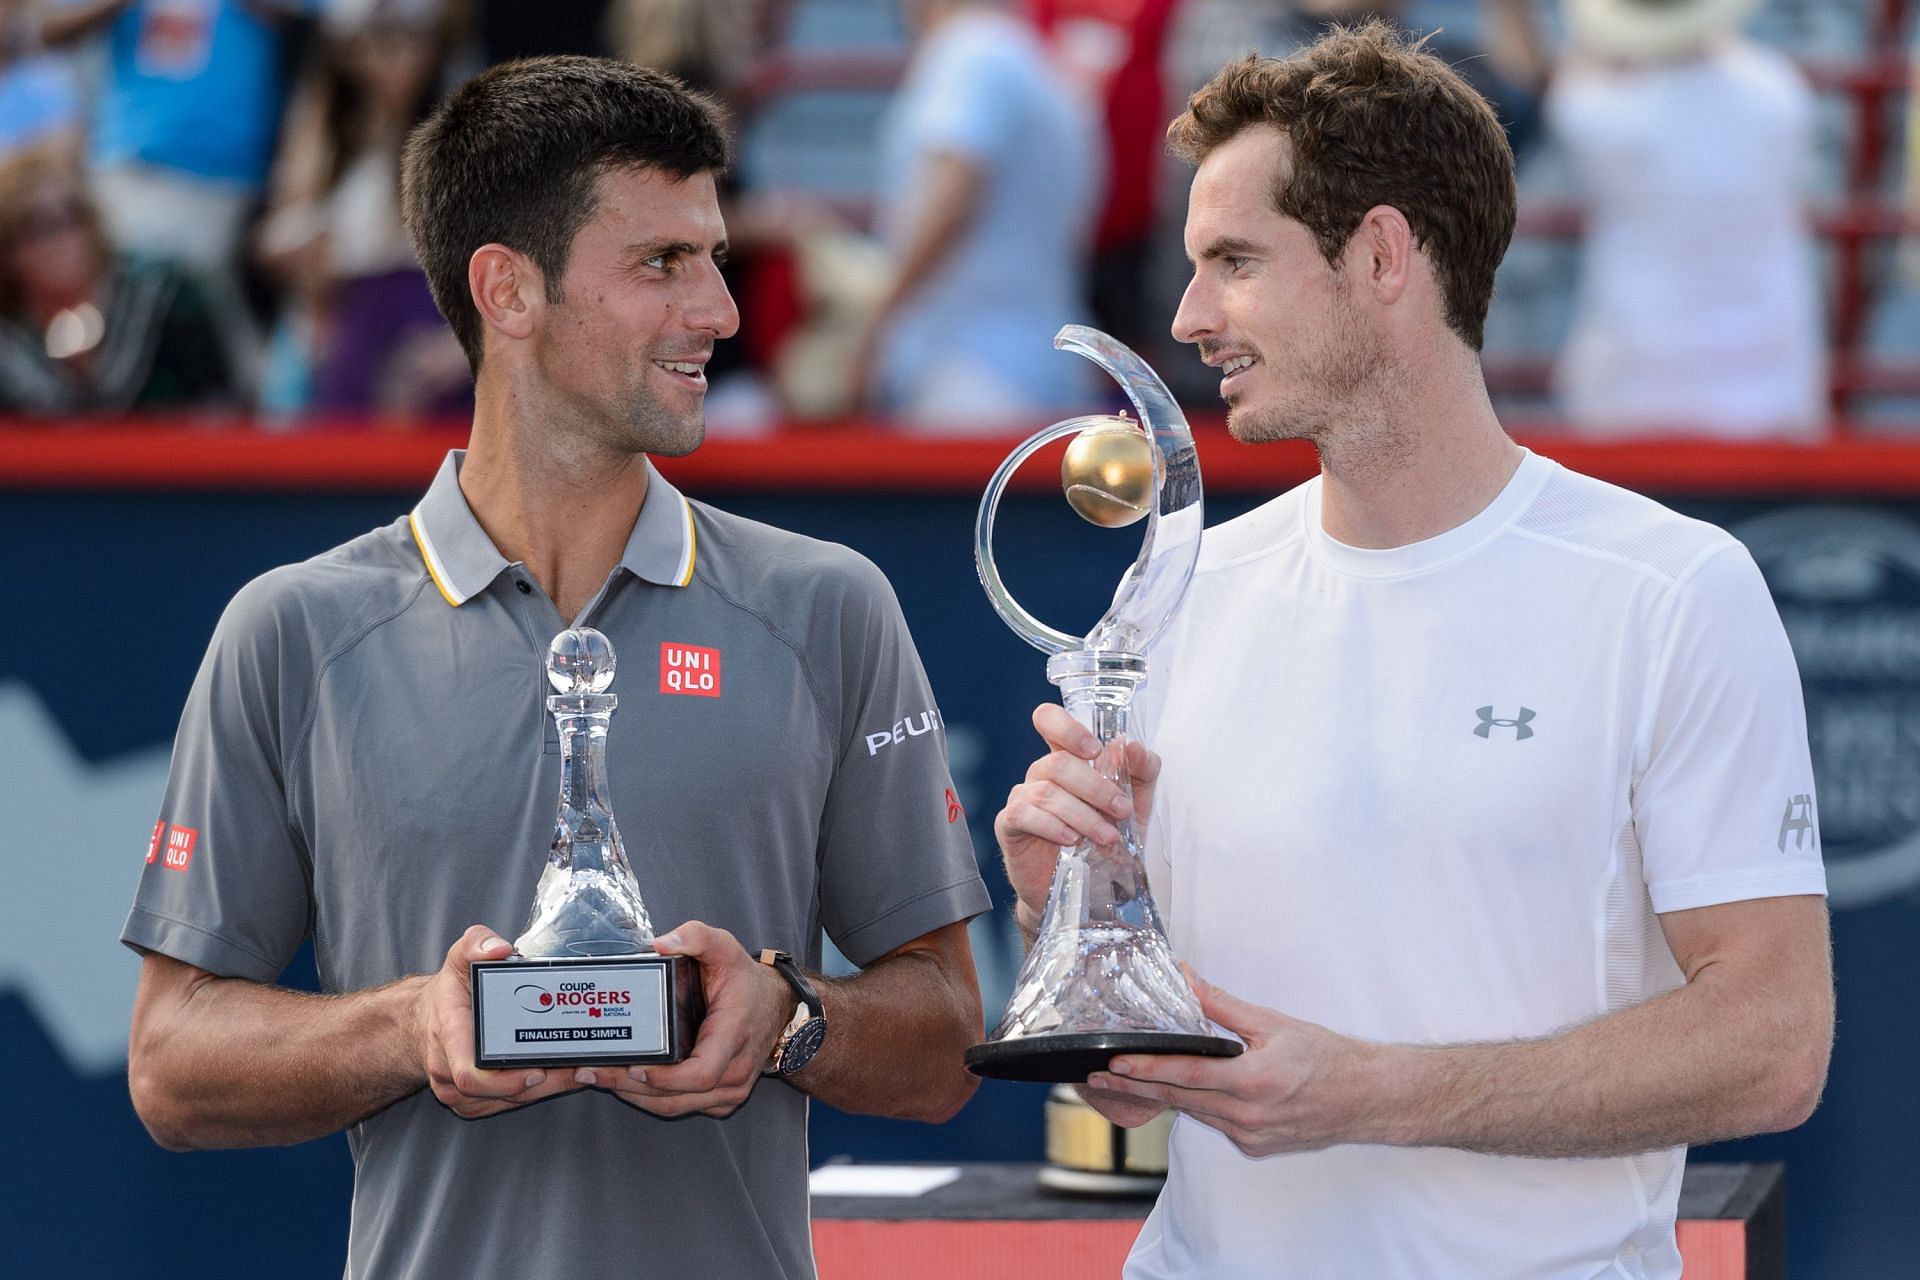 Andy Murray [right] after beating Novak Djokovic in the 2015 Rogers Cup in Montreal